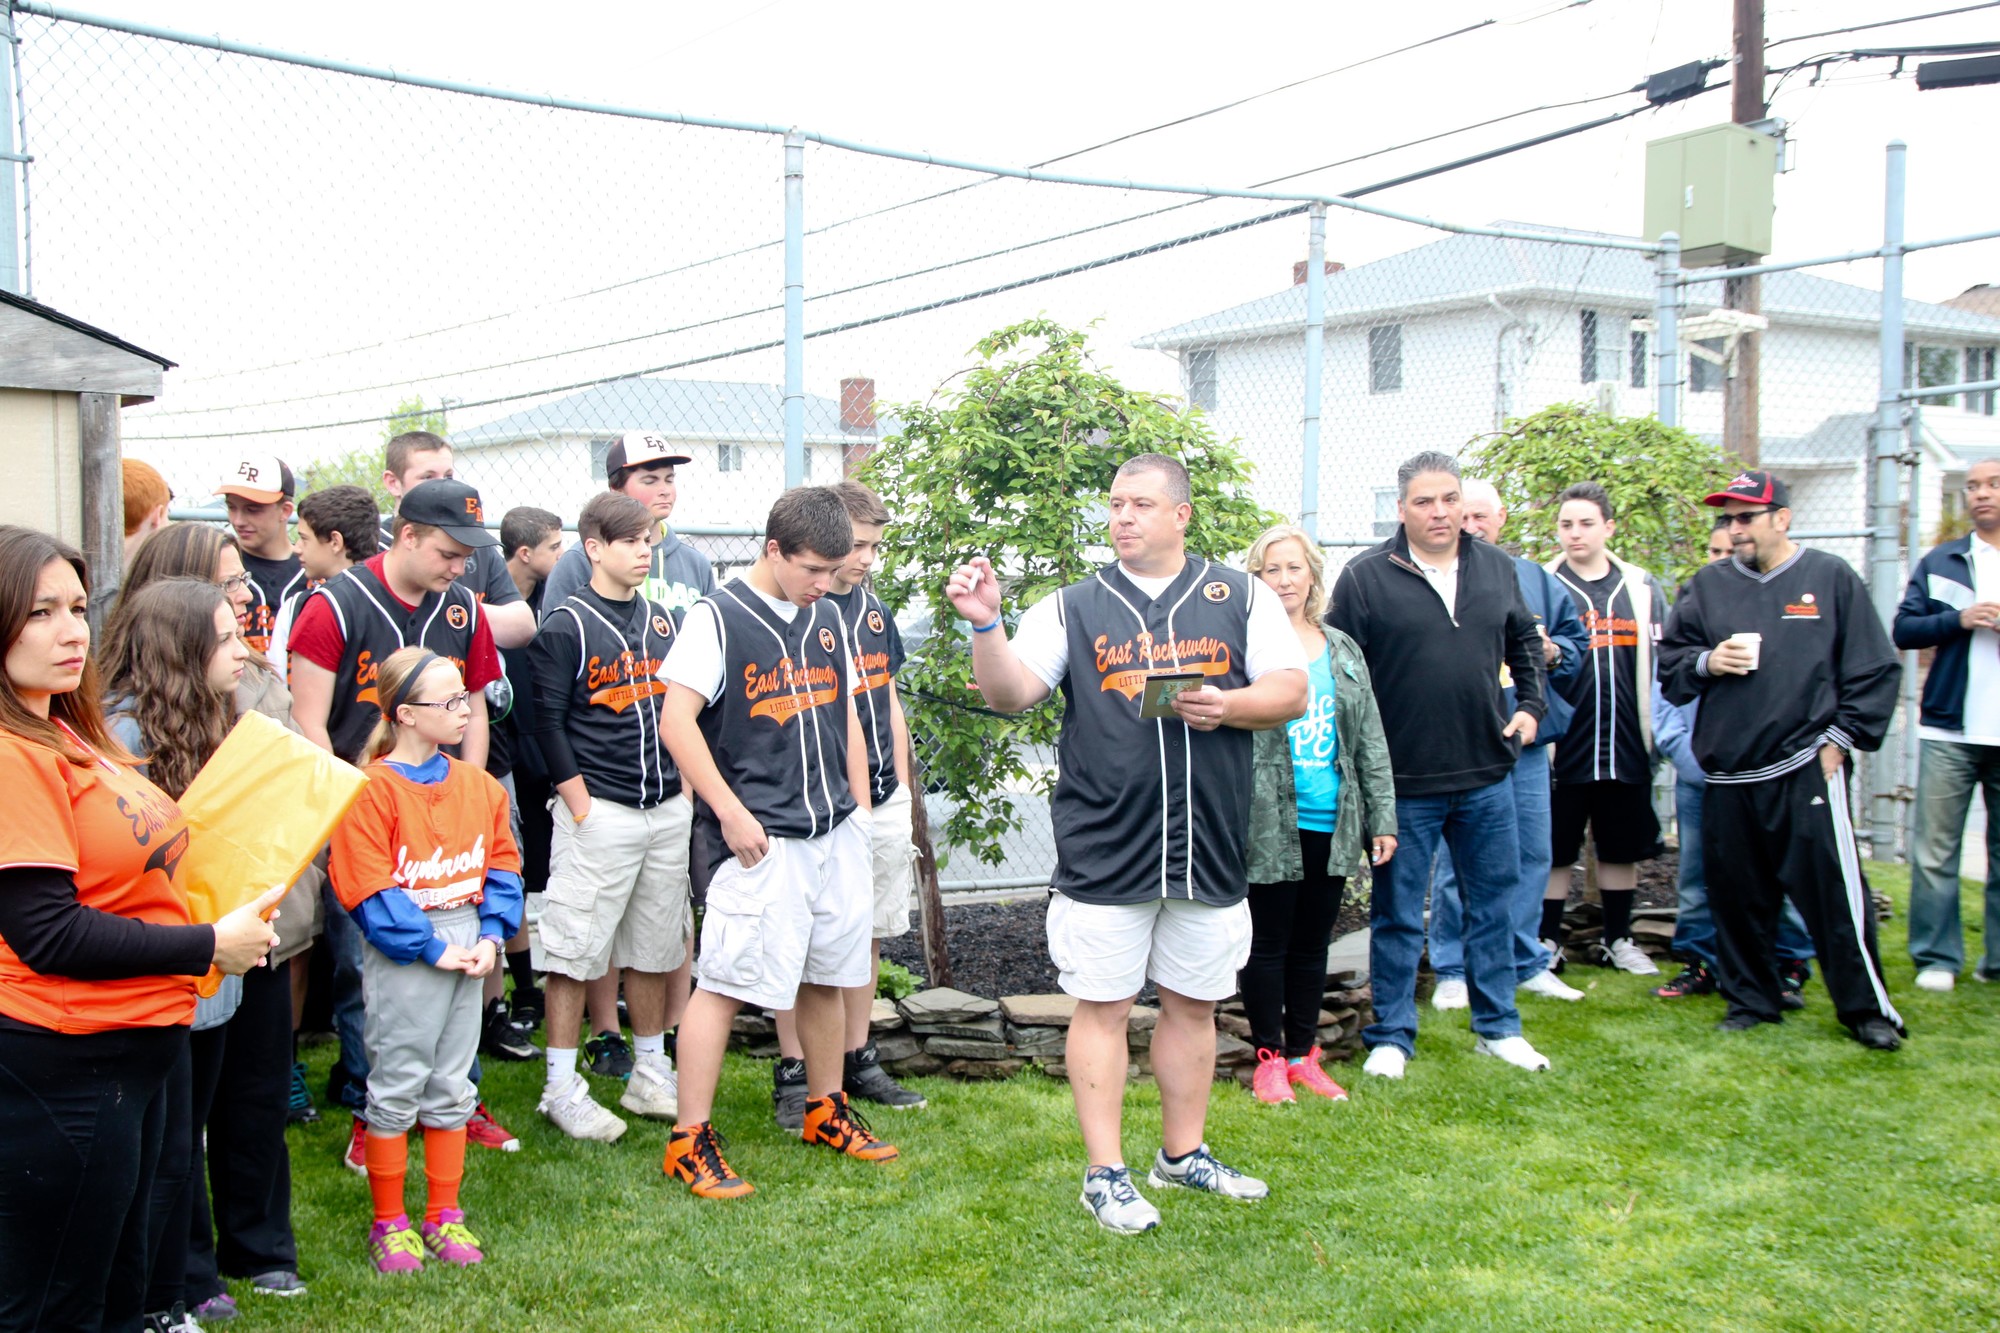 Tom LaBarbera, Gio's former little league coach, spoke kind words at Saturday morning's ceremony.